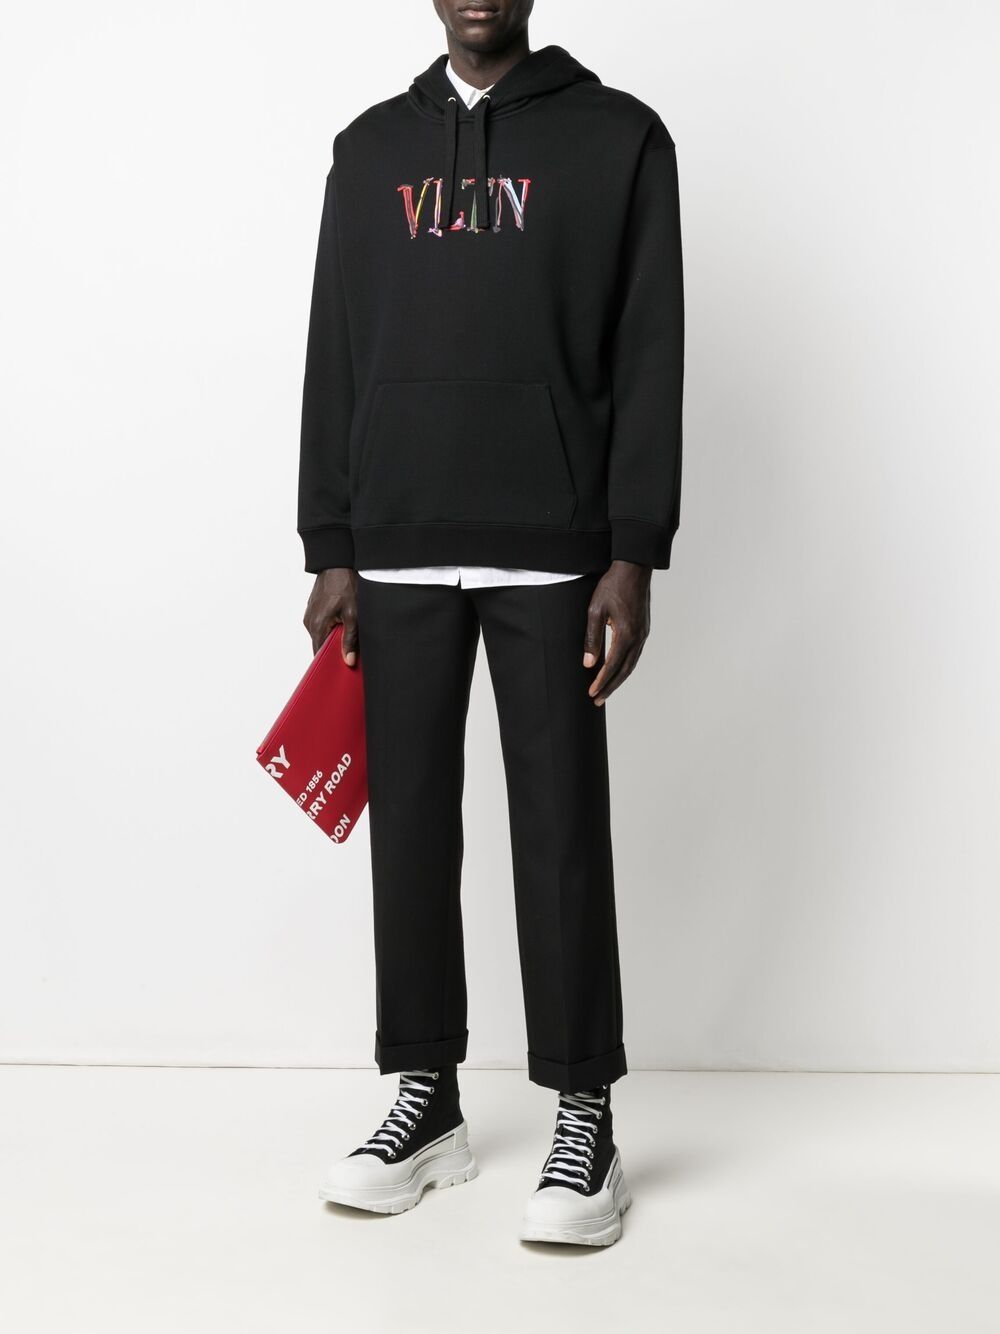 Shop Valentino hand-drawn logo hoodie with Express Delivery - FARFETCH